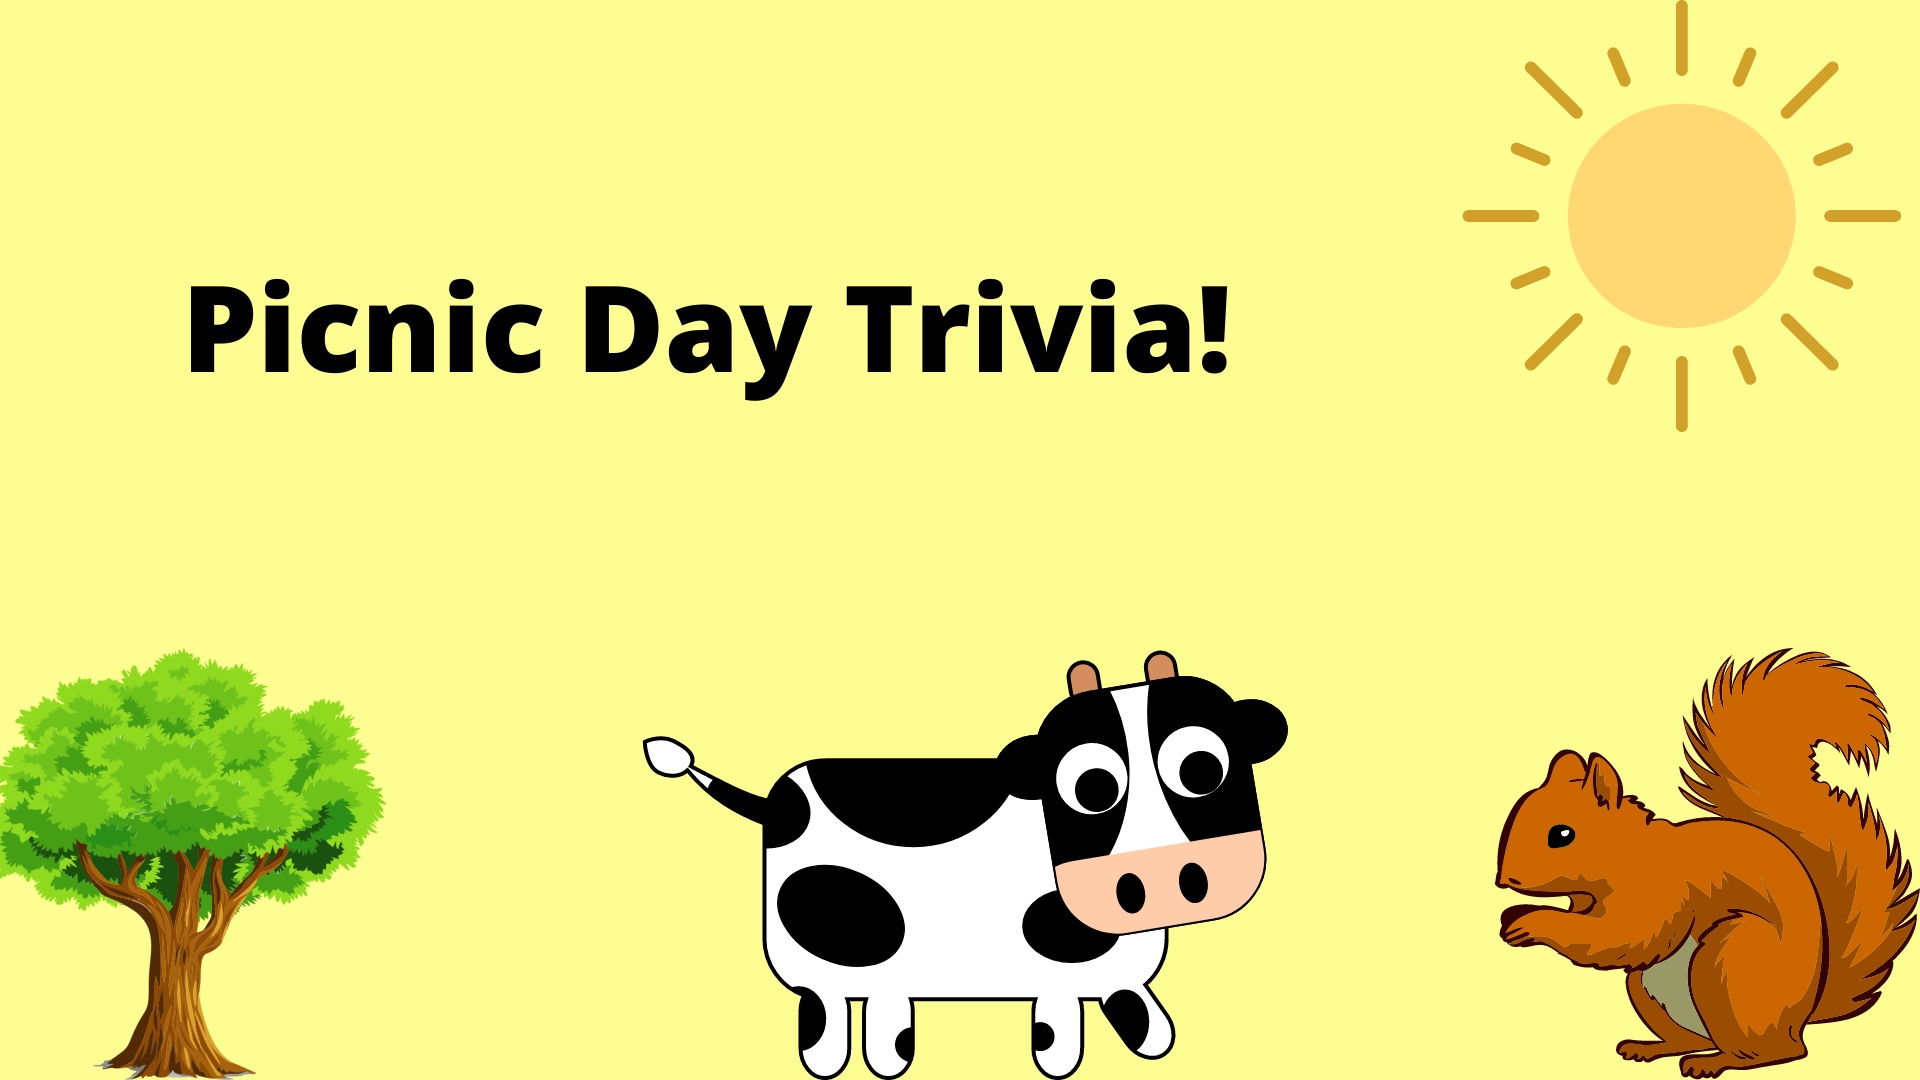 text that reads "picnic day trivia" along with animated images of a tree, cow, squirrel, and sun 